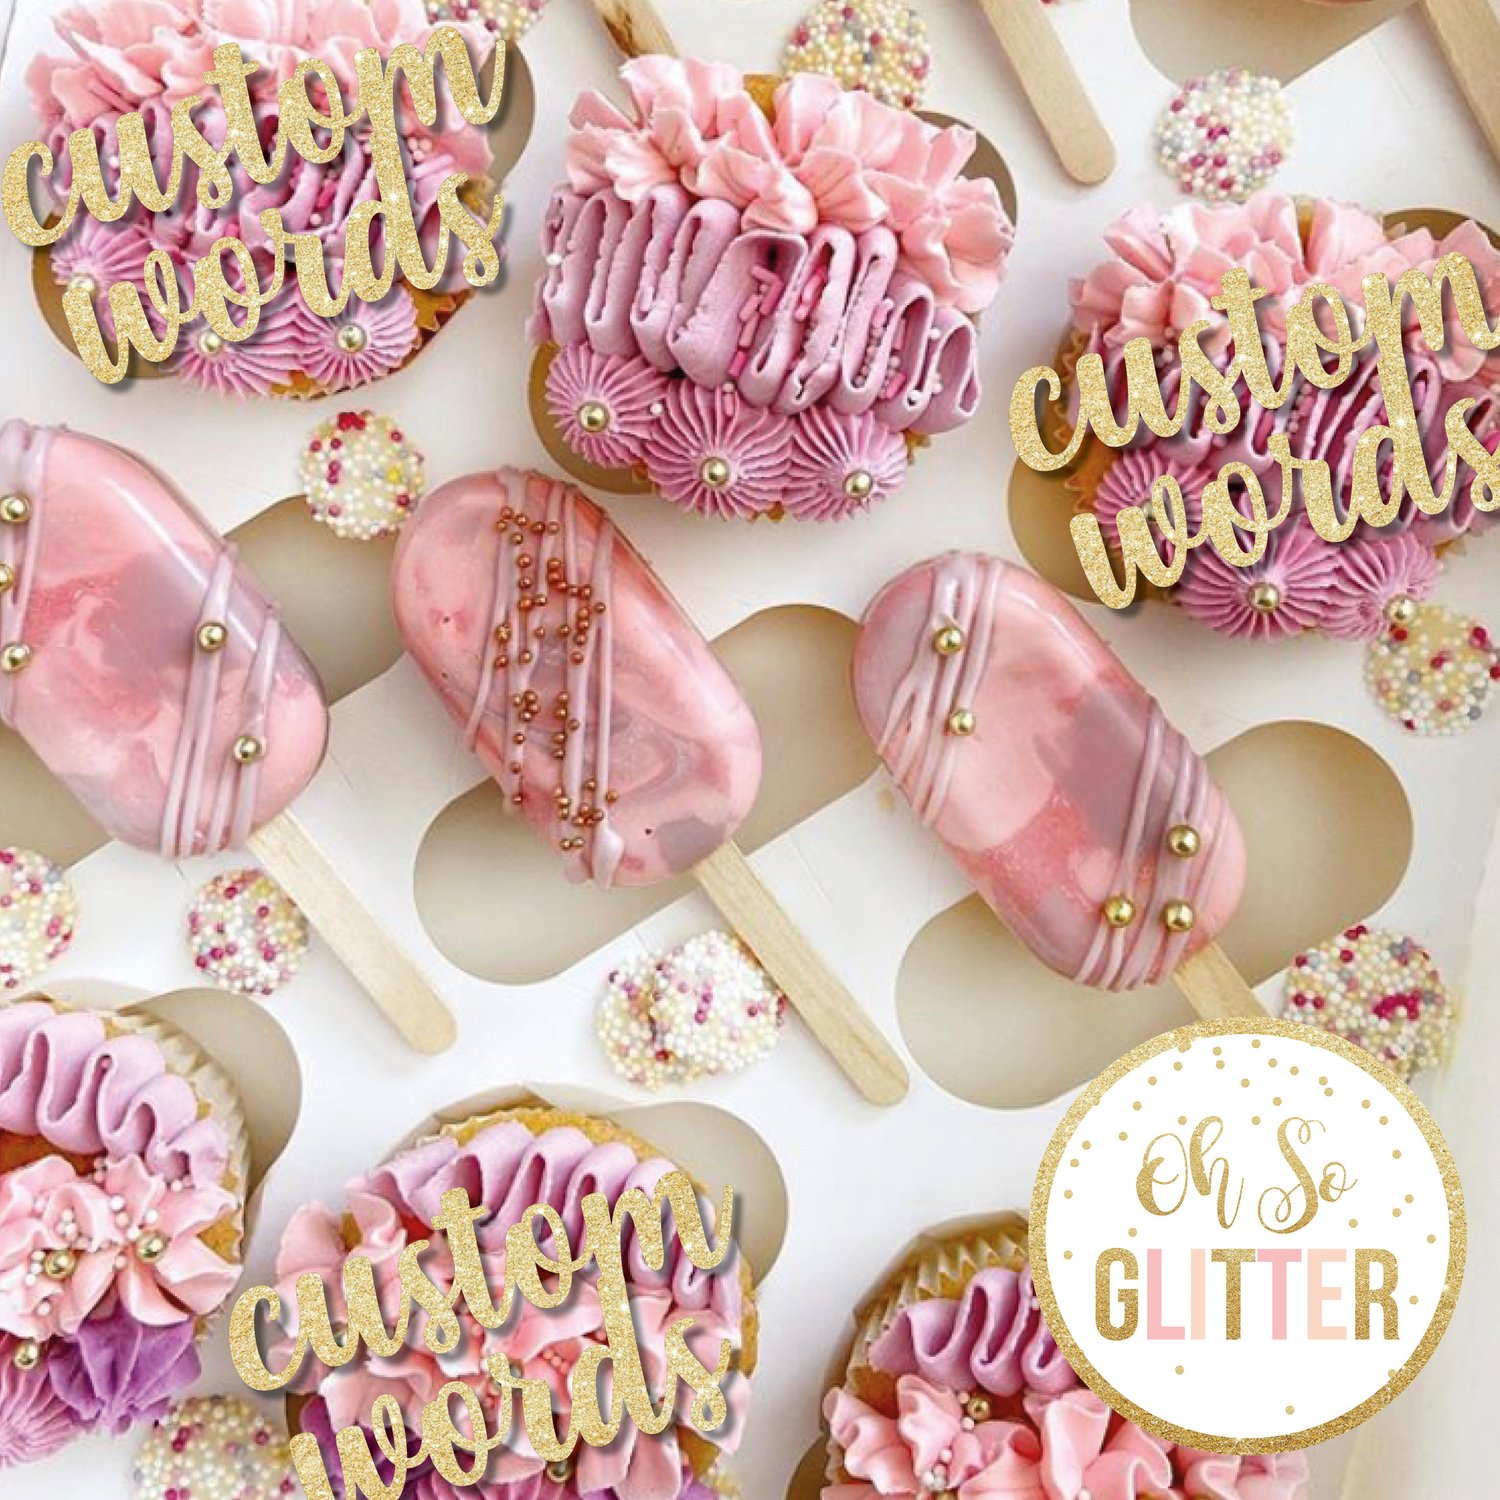 Image of Customised cupcake toppers - no sticks